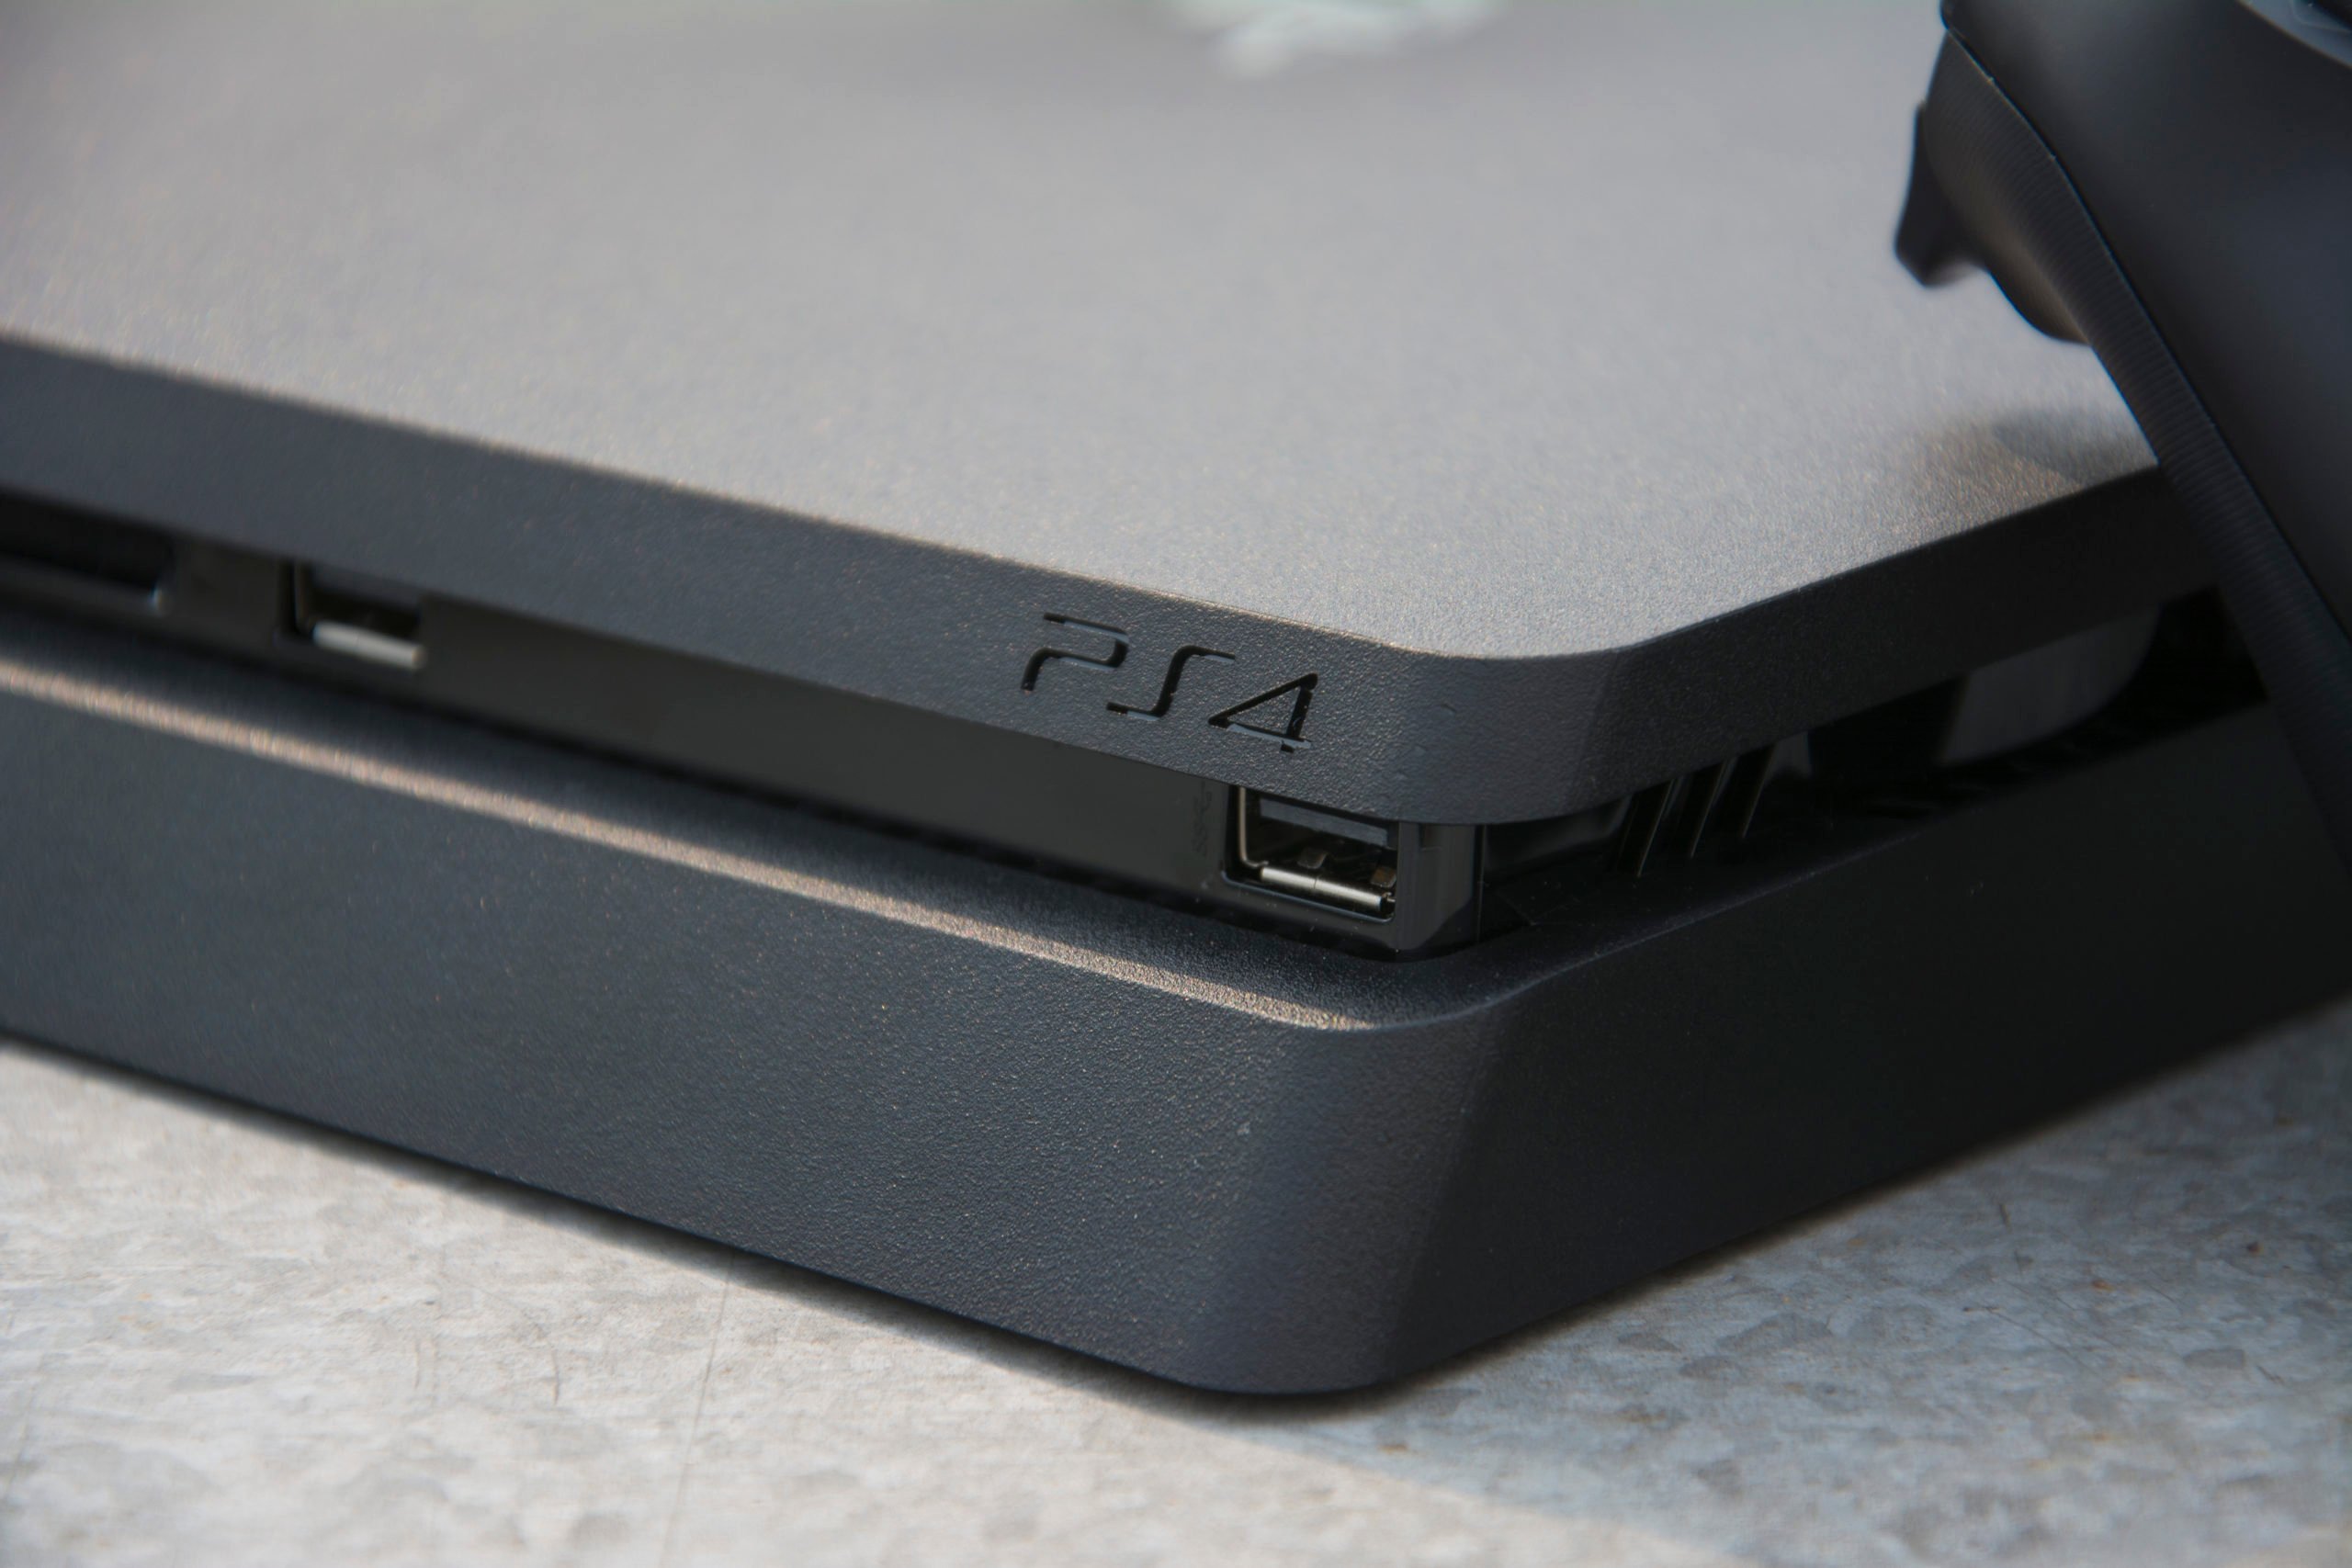 PS4 review: Compact, beautiful and exactly what you'd expect